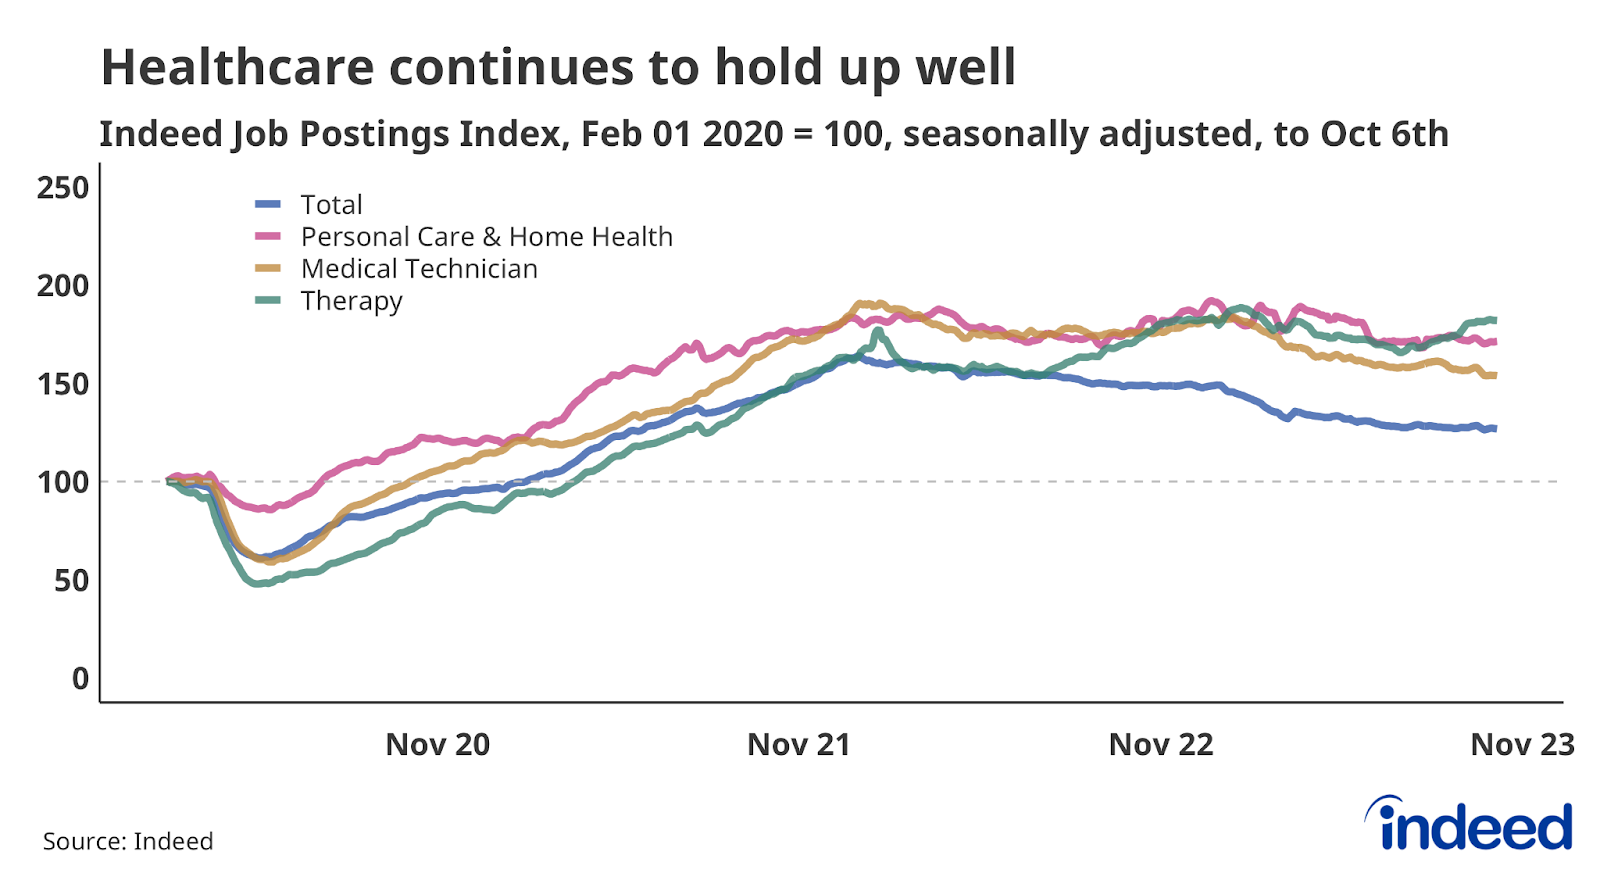 Line chart titled "Healthcare continues to hold up well," shows job postings in Personal Care & Home Health, Medical Technician, and Therapy to October 6, 2023. Therapy job postings are up 6.1% over the past year.